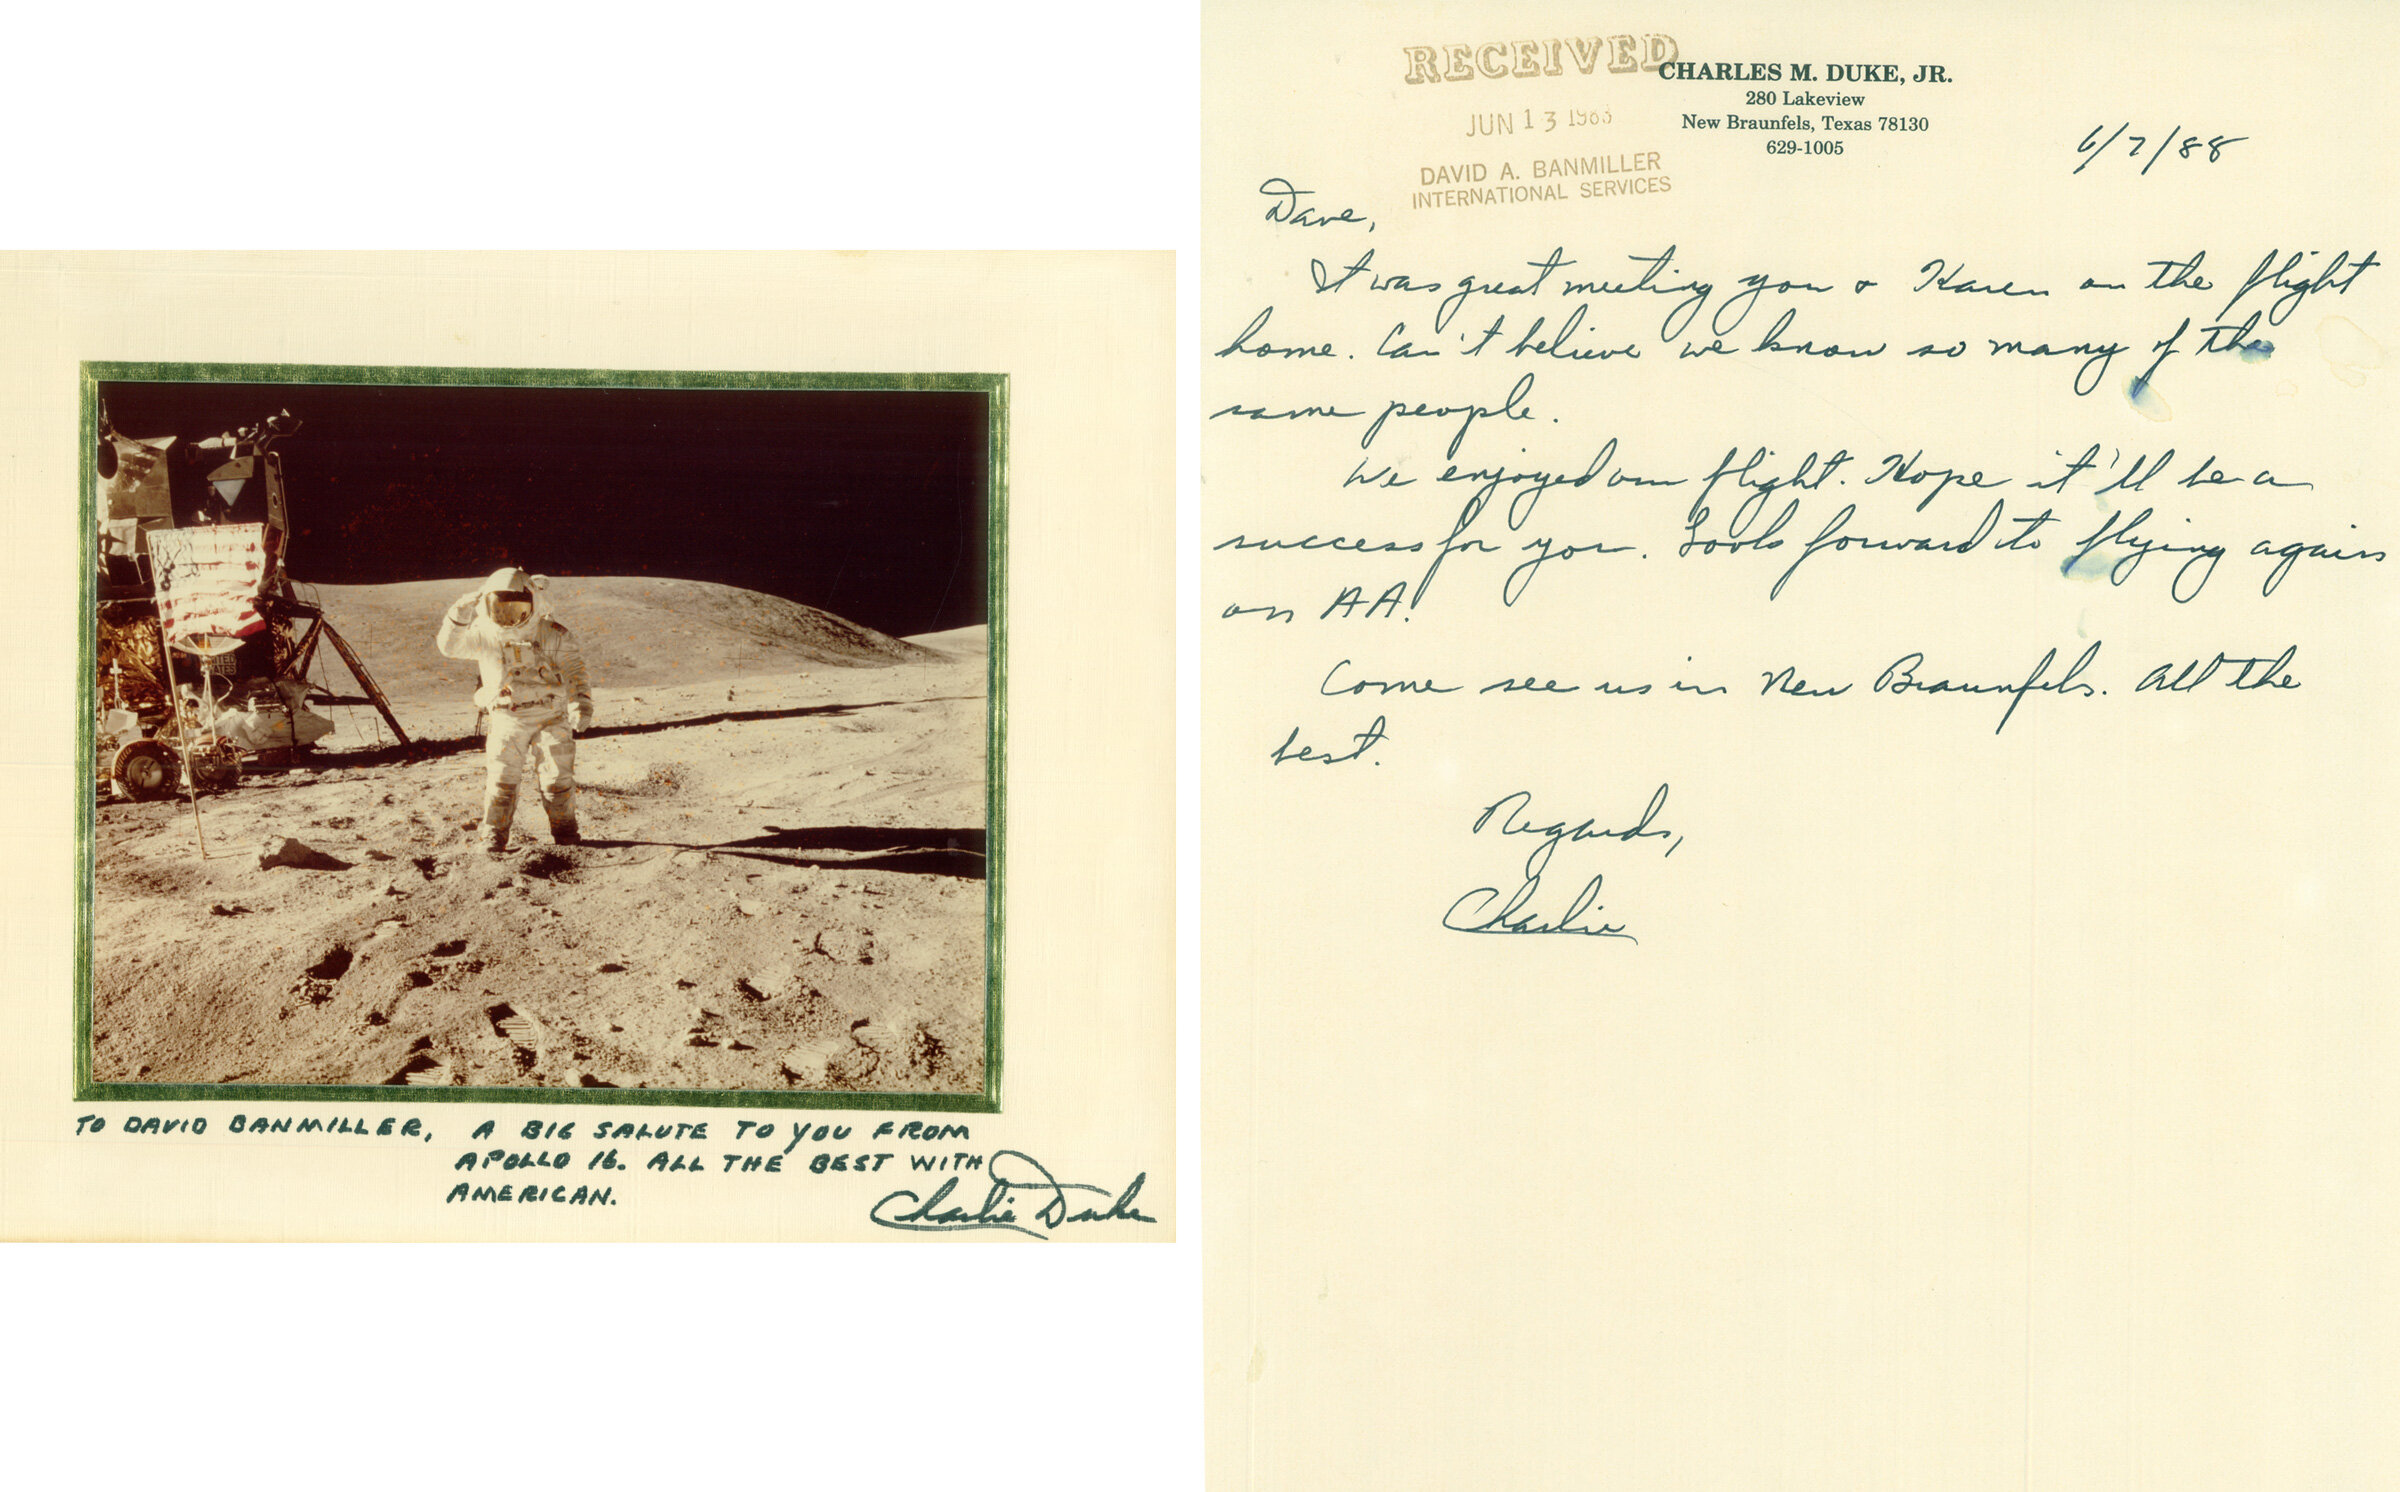  A letter and signed photo of himself on the moon from astronaut Charlie Duke, who I met on a flight. 